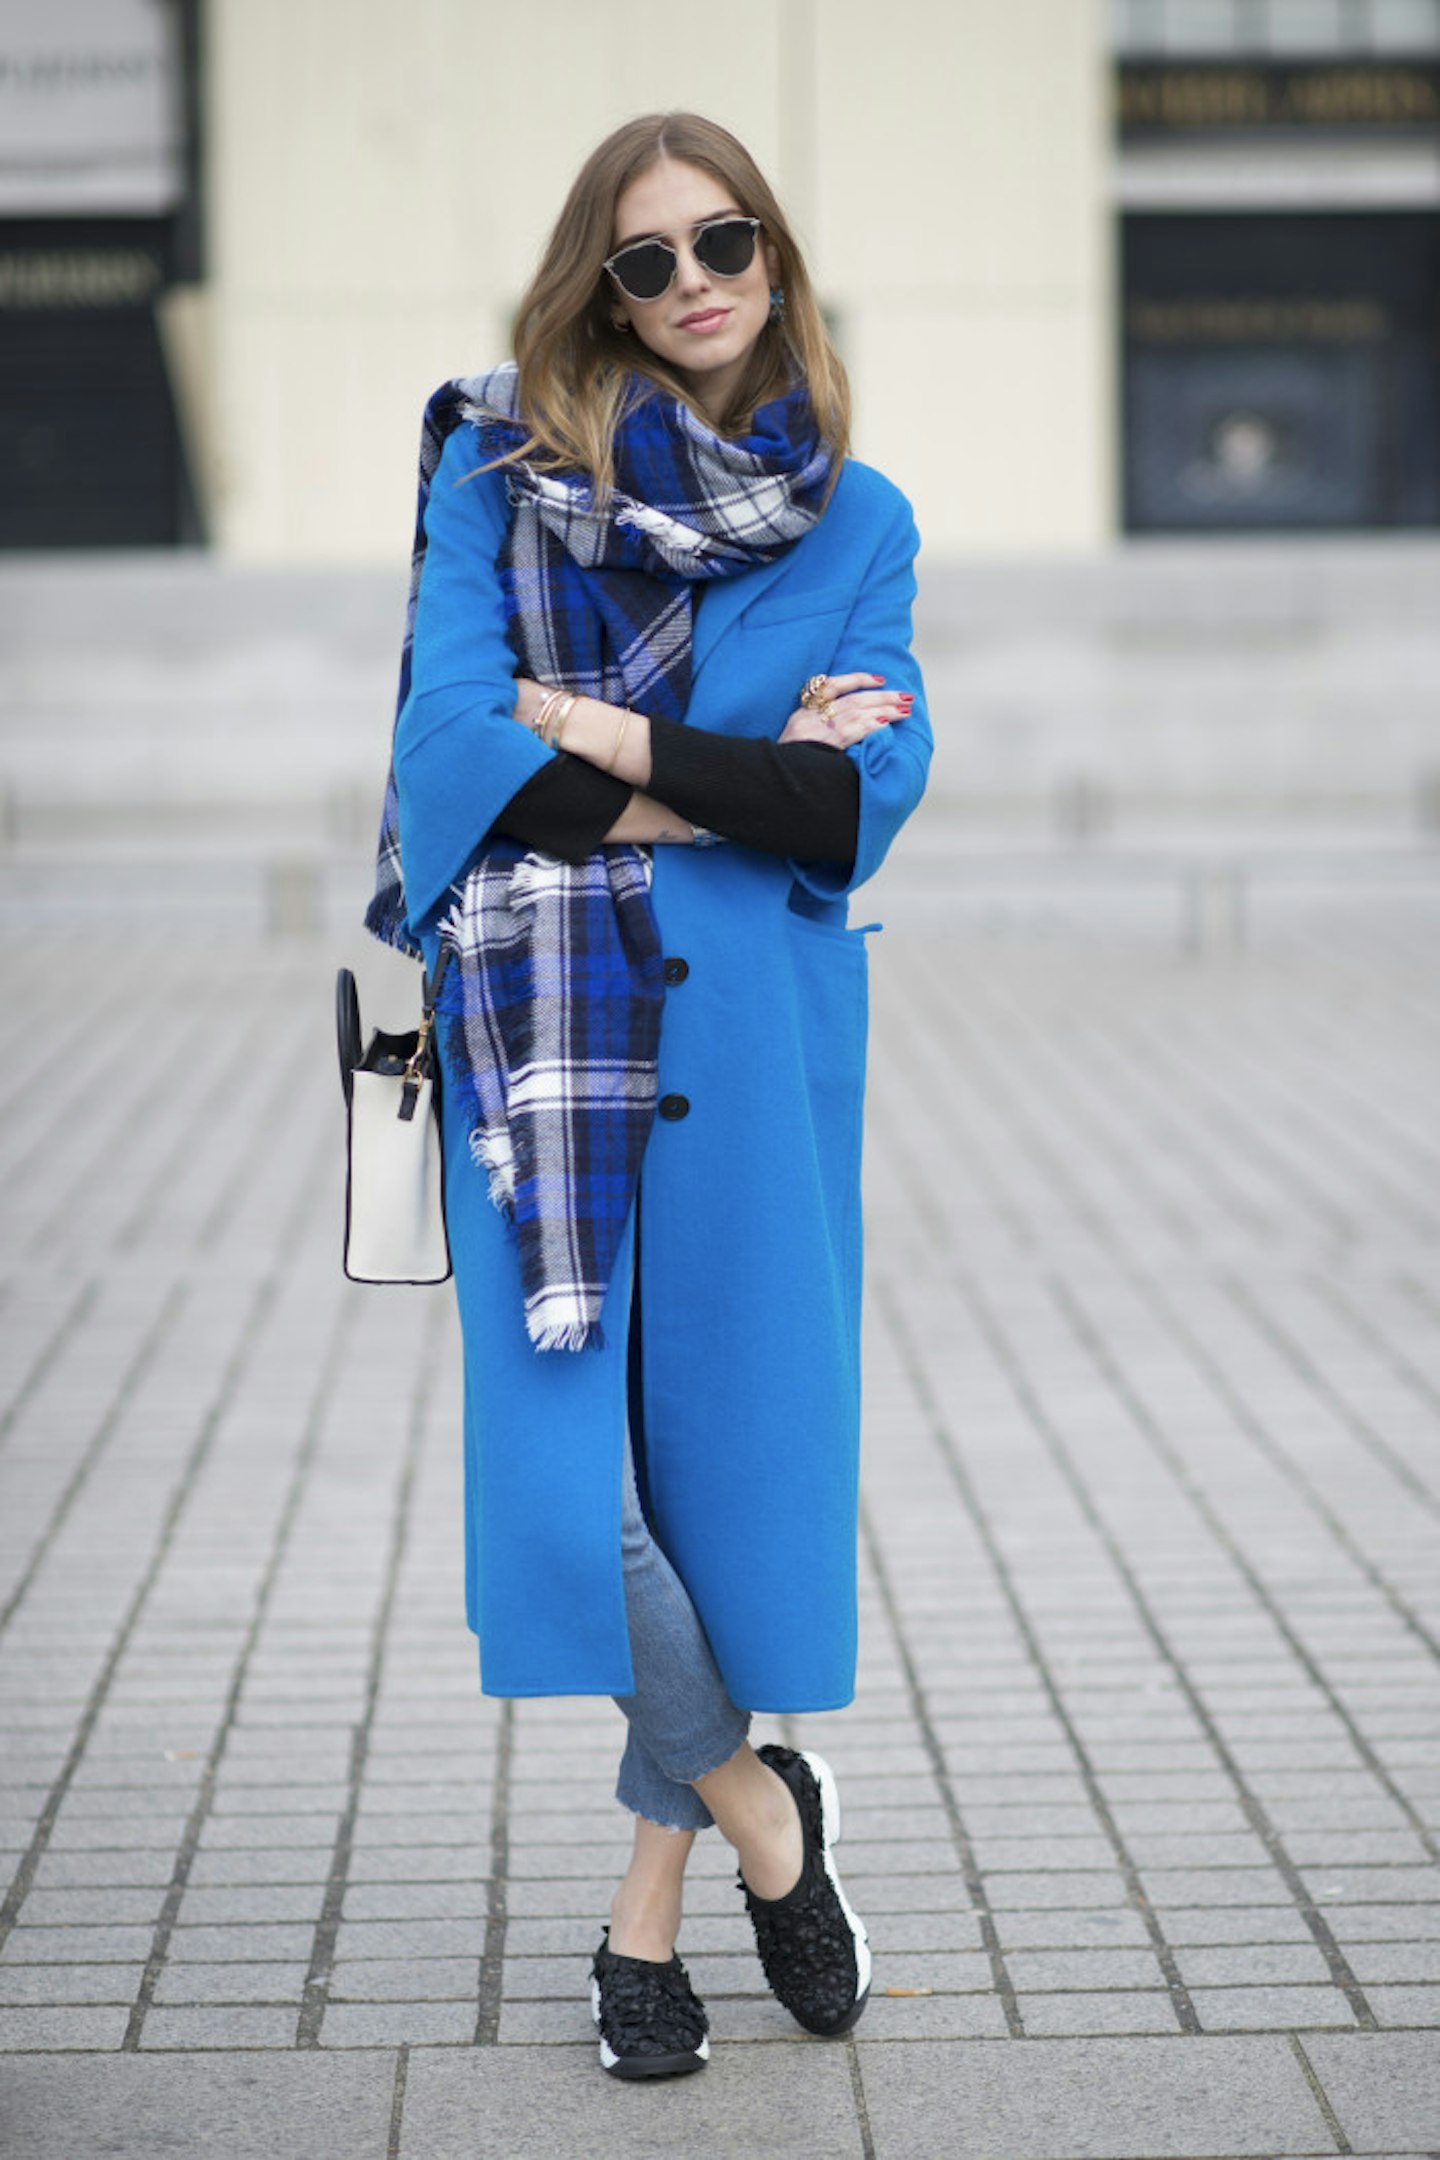 GALLERY >> The Best Street Style at Paris Haute Couture Fashion Week 2015